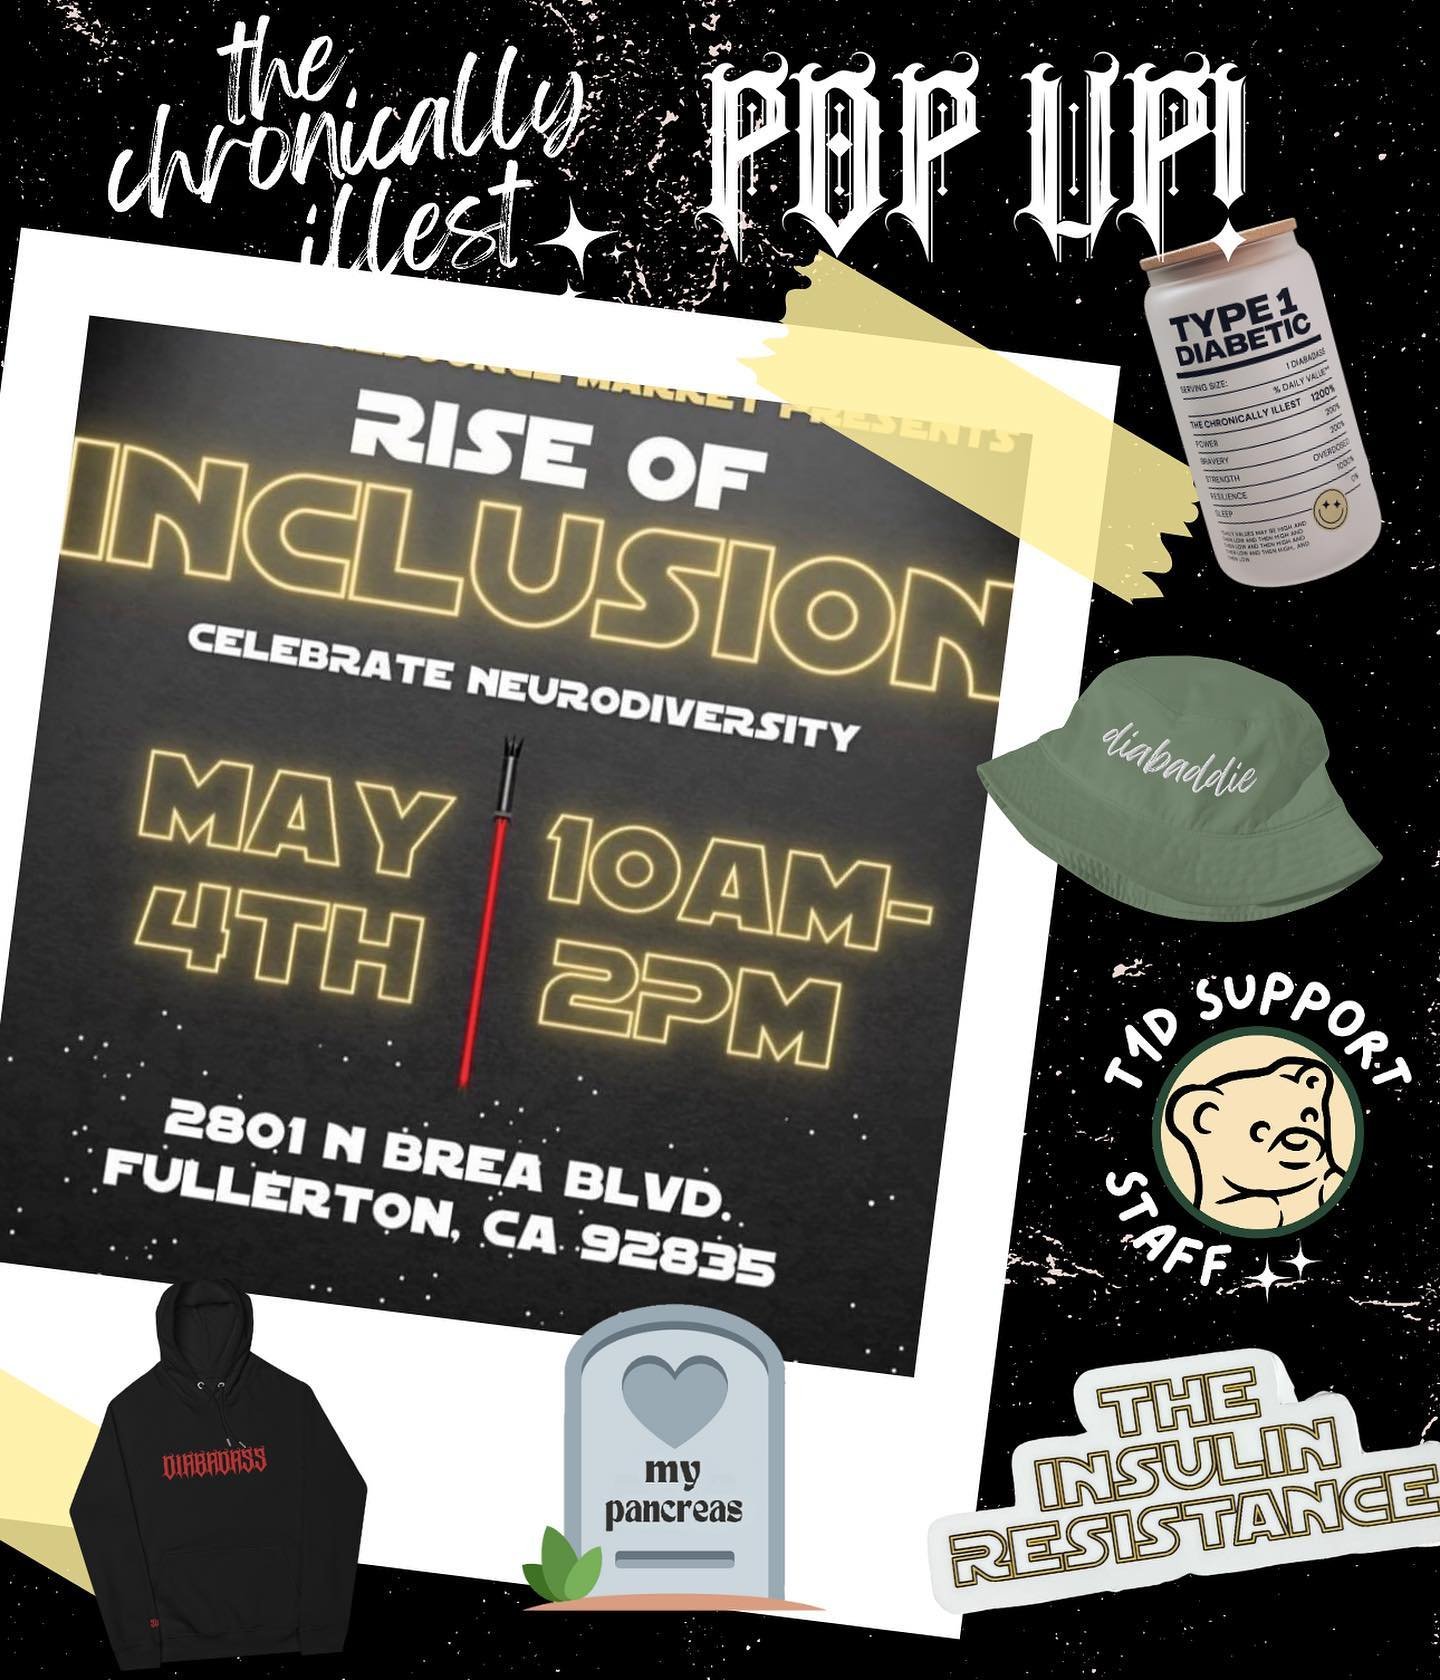 POP UP TOMORROW!!! IN FULLERTON ✨💕 this is going to be a special one- this market will have awesome vendors and also autism resources and non-profits! They have a sensory room, activities, AND Darth Vader &amp; his storm troopers will make an appear